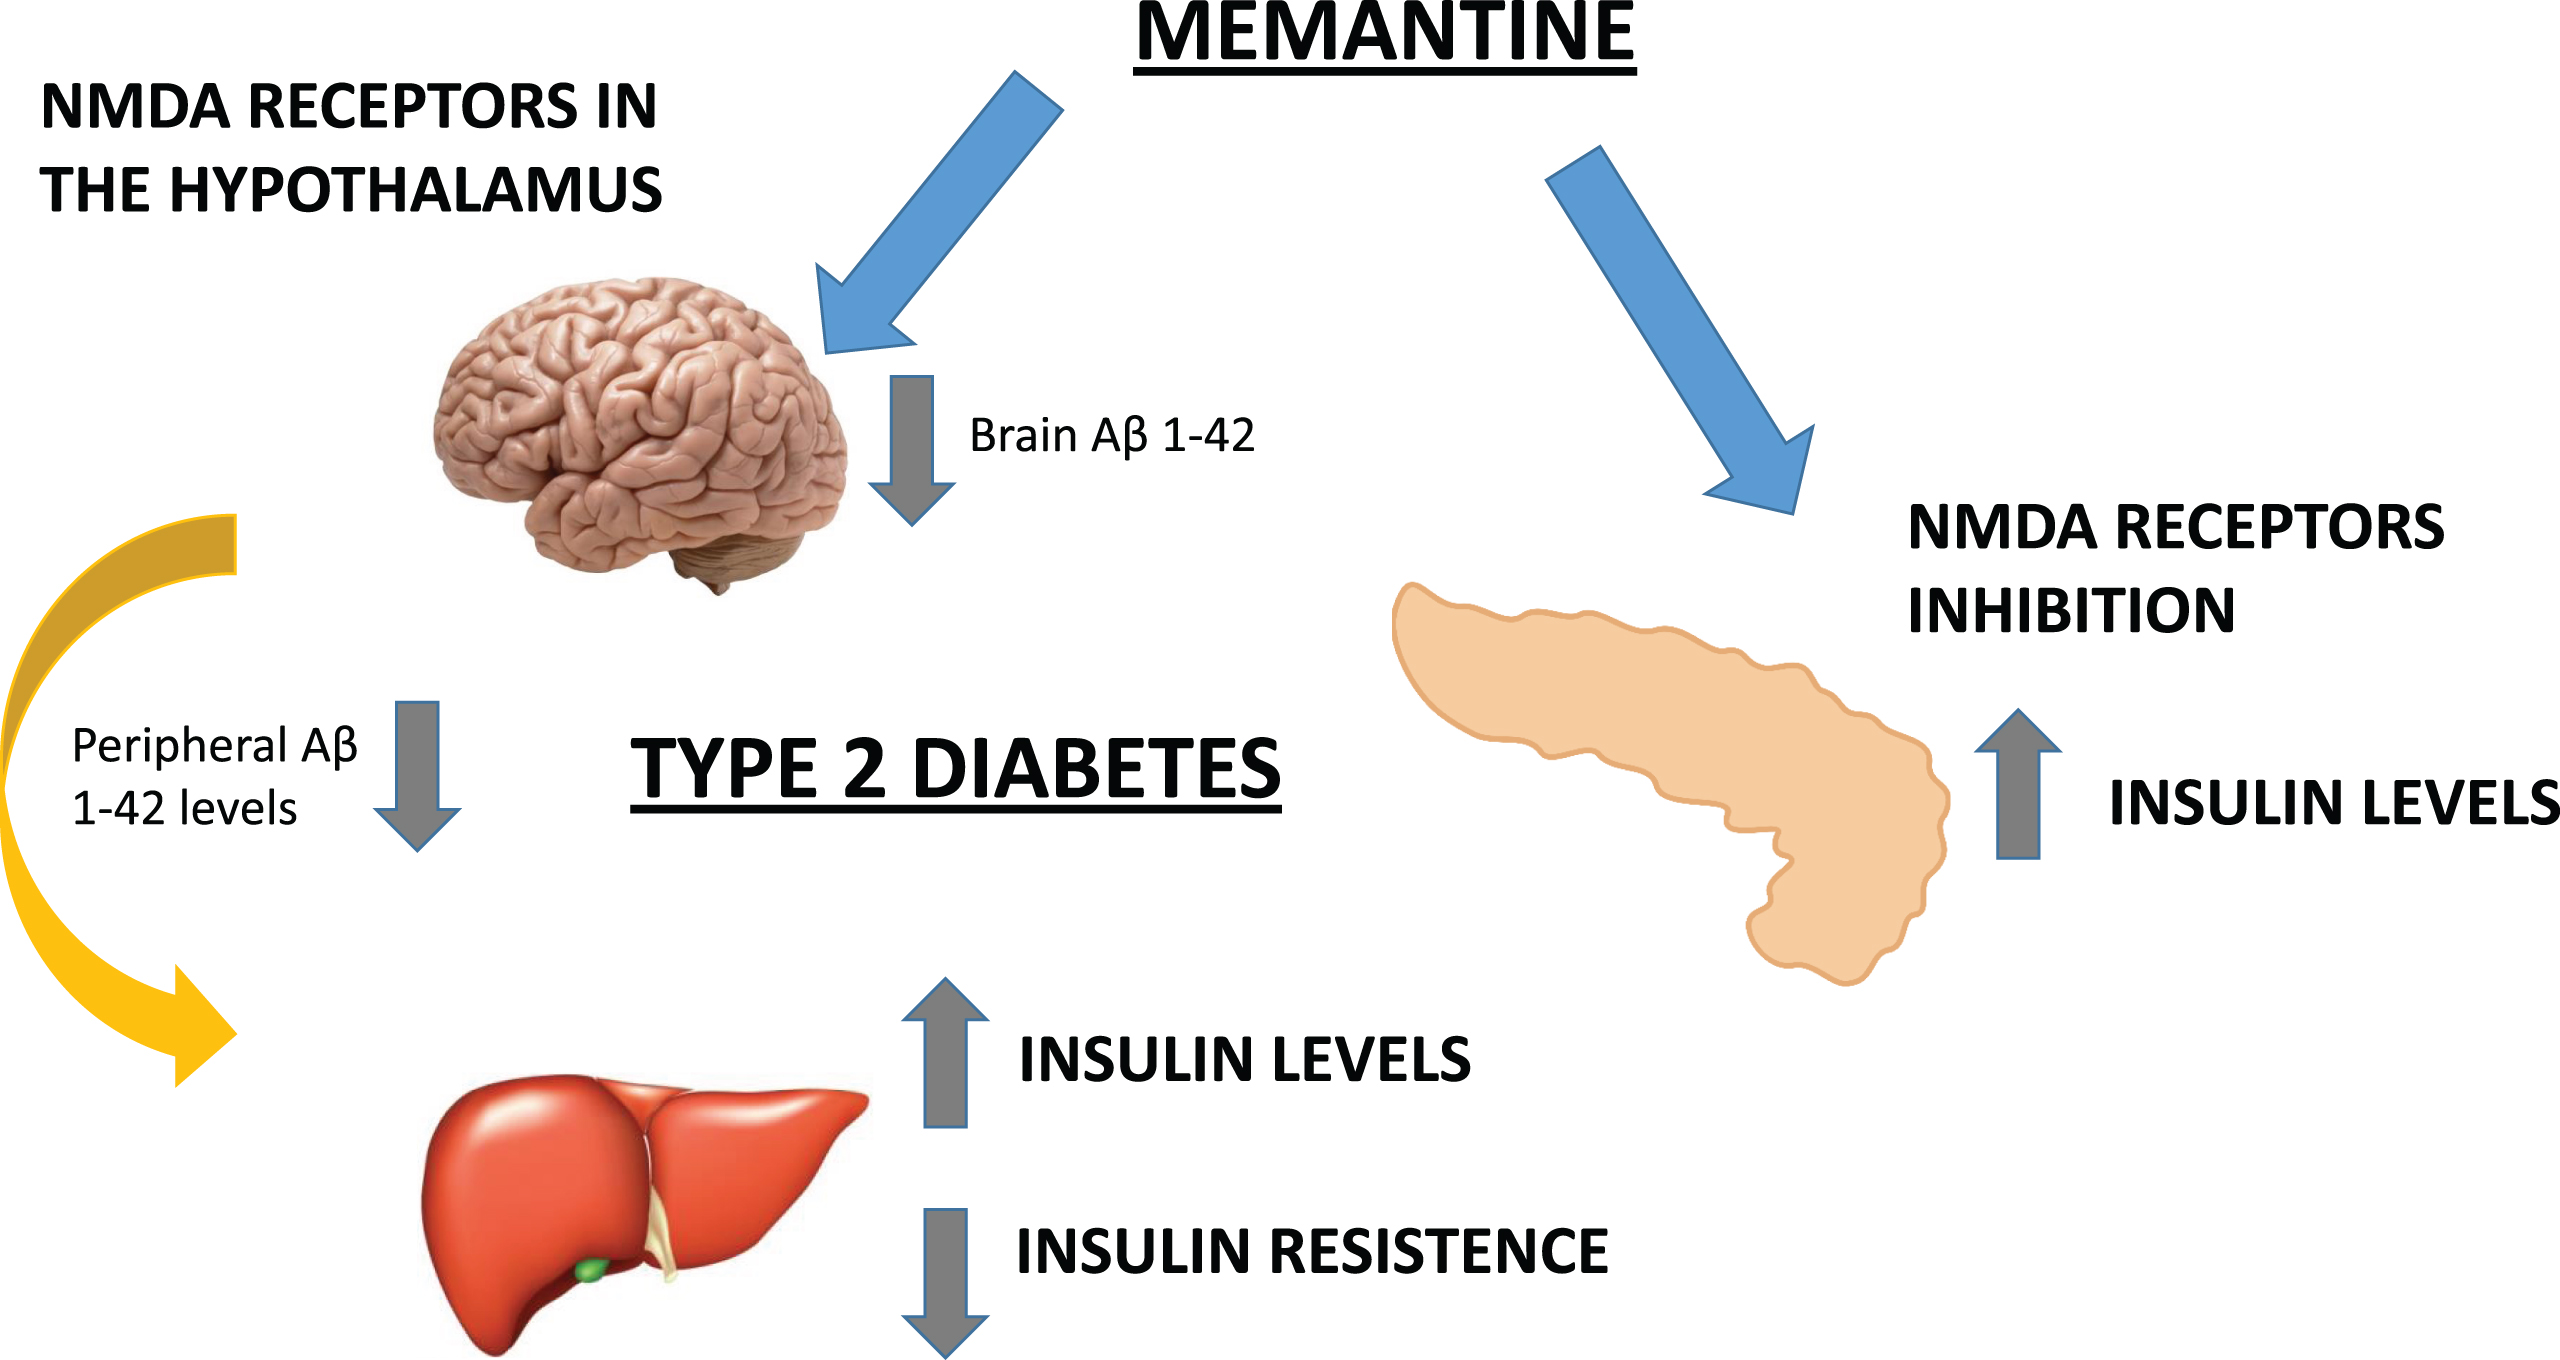 We hypothesized that the potential beneficial metabolic effects of MEM are mediated by the inhibition of peripheral (pancreatic) NMDAR and the blockade of hypothalamic Aβ1 - 42 levels. Therefore, AD could be a cognitive disorder associated to metabolic alterations both in central (insulin receptors) and peripheral areas.